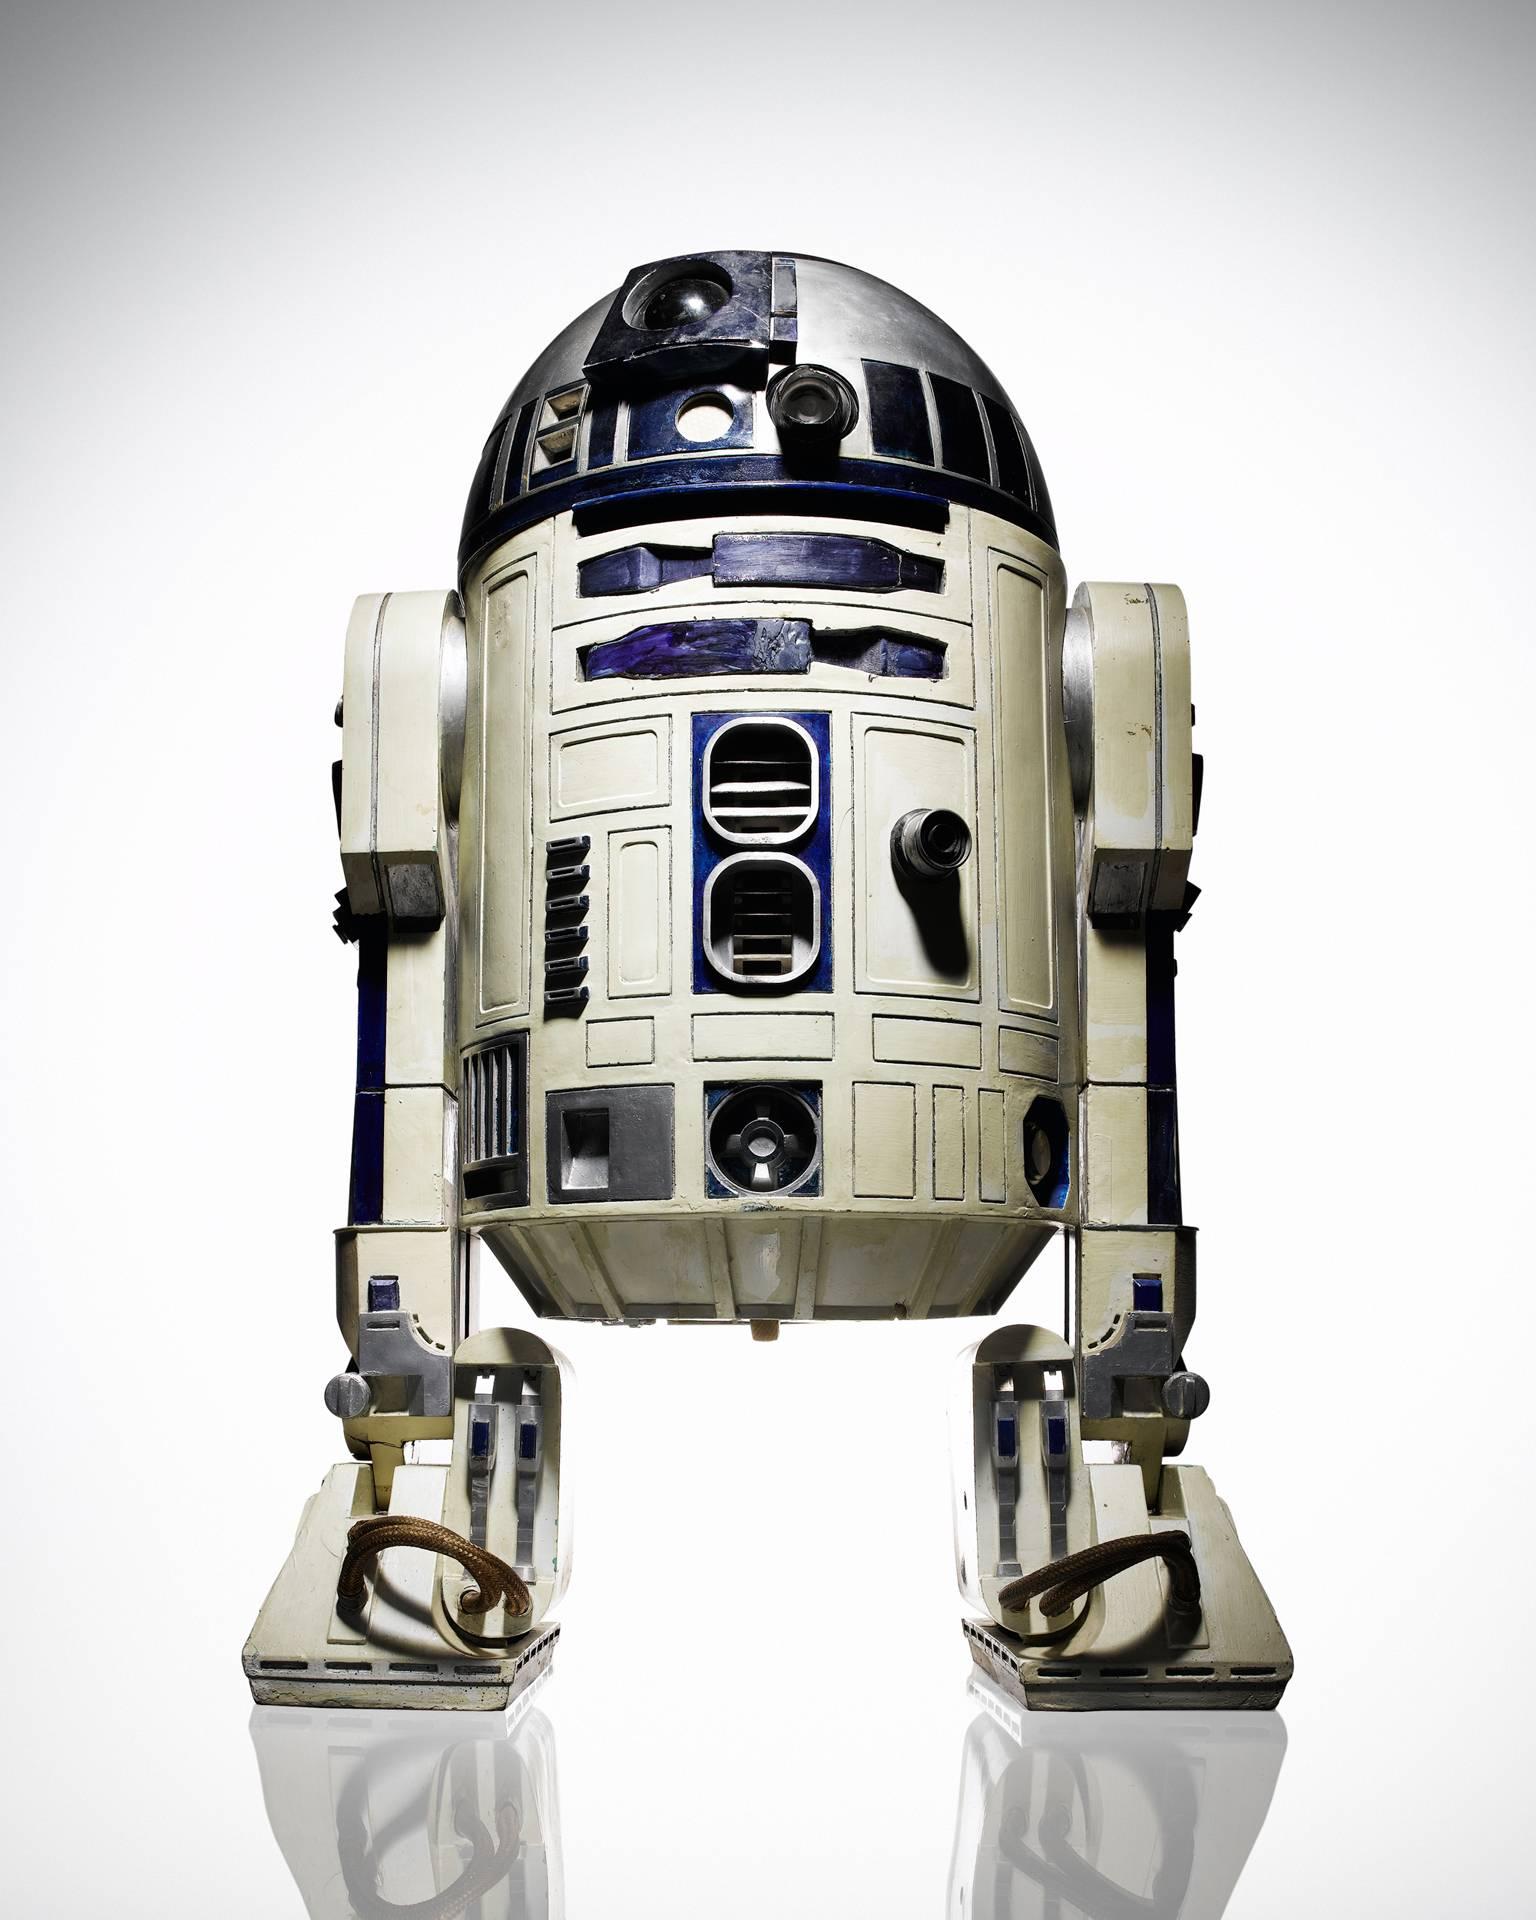 Star Wars R2-D2 - large format photograph of the original iconic droid robot